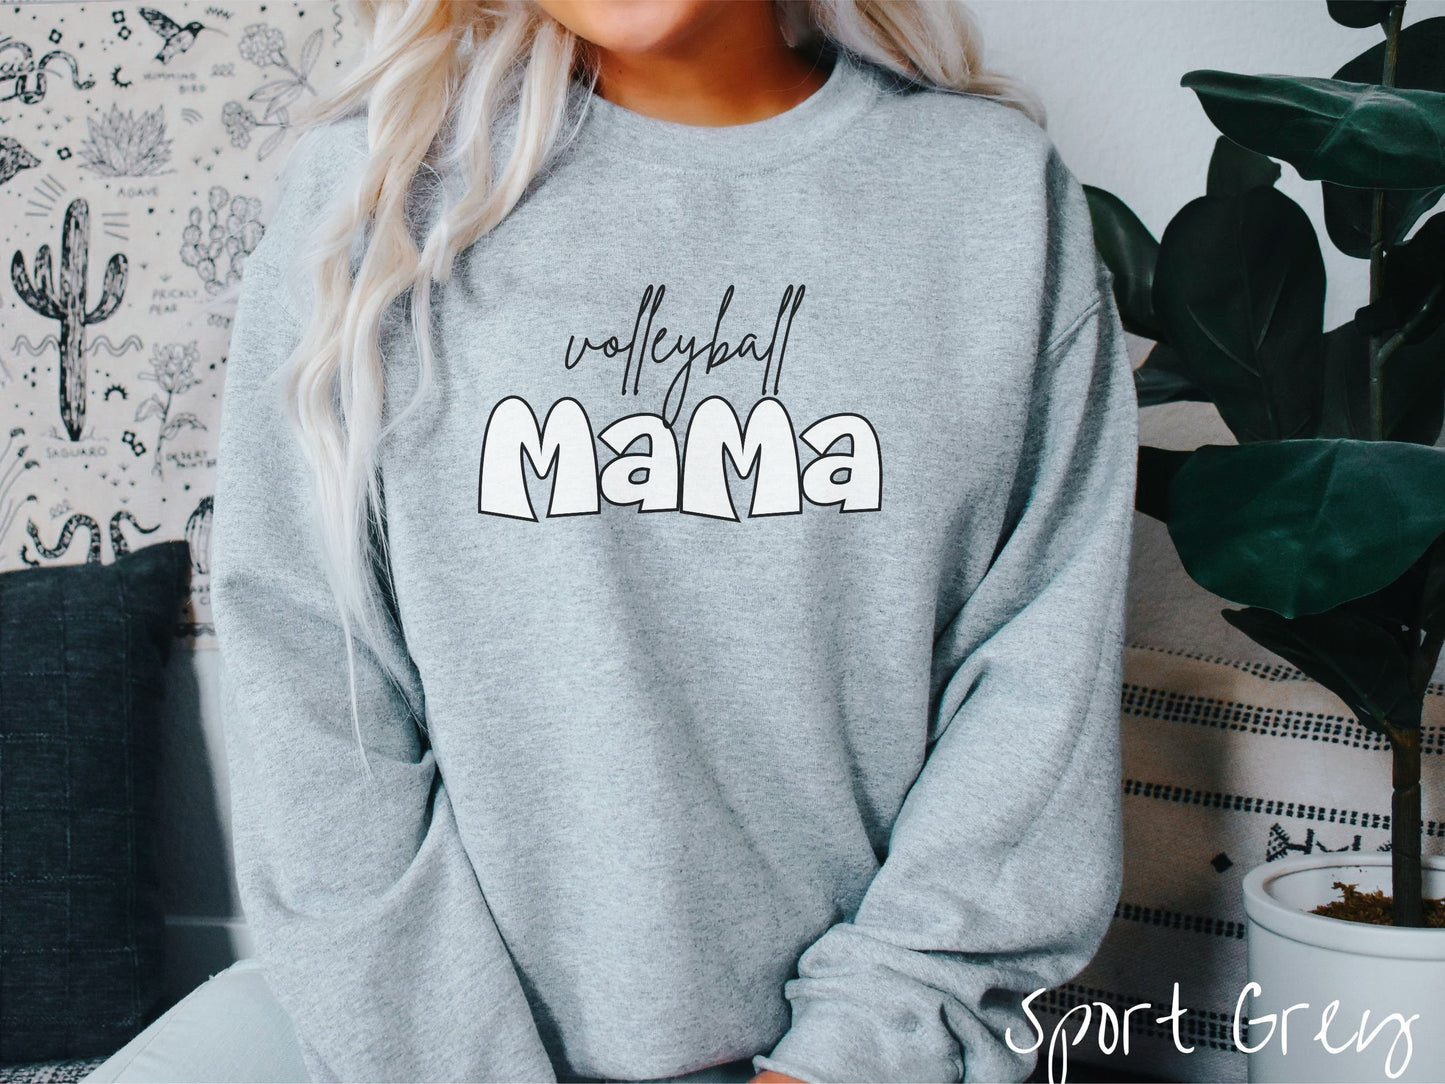 A woman wearing a cute, vintage sport grey colored sweatshirt with the word volleyball across the front in black, undercase cursive writing. Below that is the word Mama in large, white font.